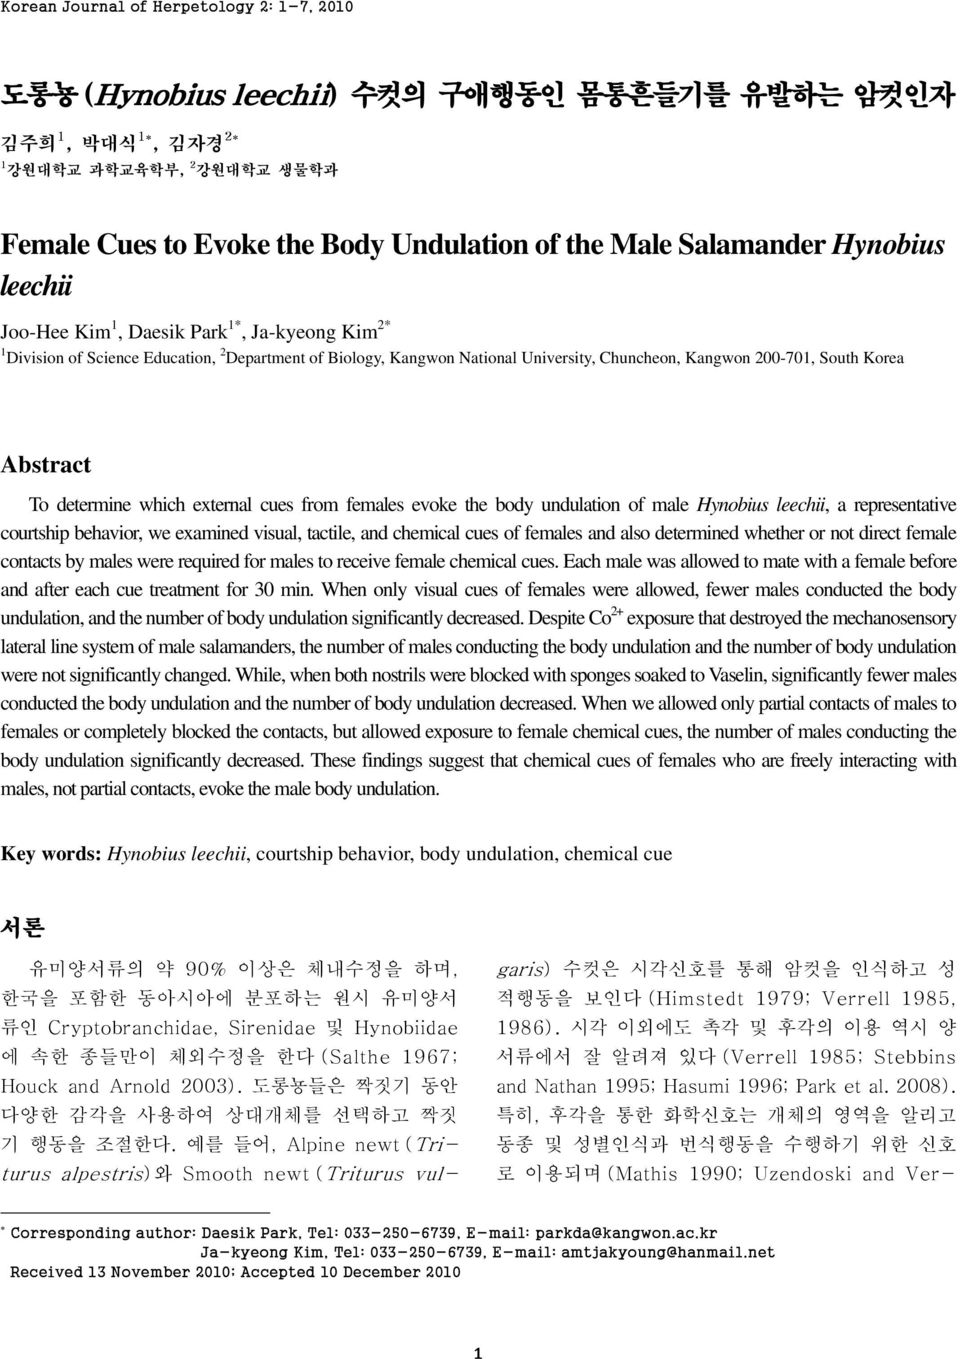 Korea Abstract To determine which external cues from females evoke the body undulation of male Hynobius leechii, a representative courtship behavior, we examined visual, tactile, and chemical cues of